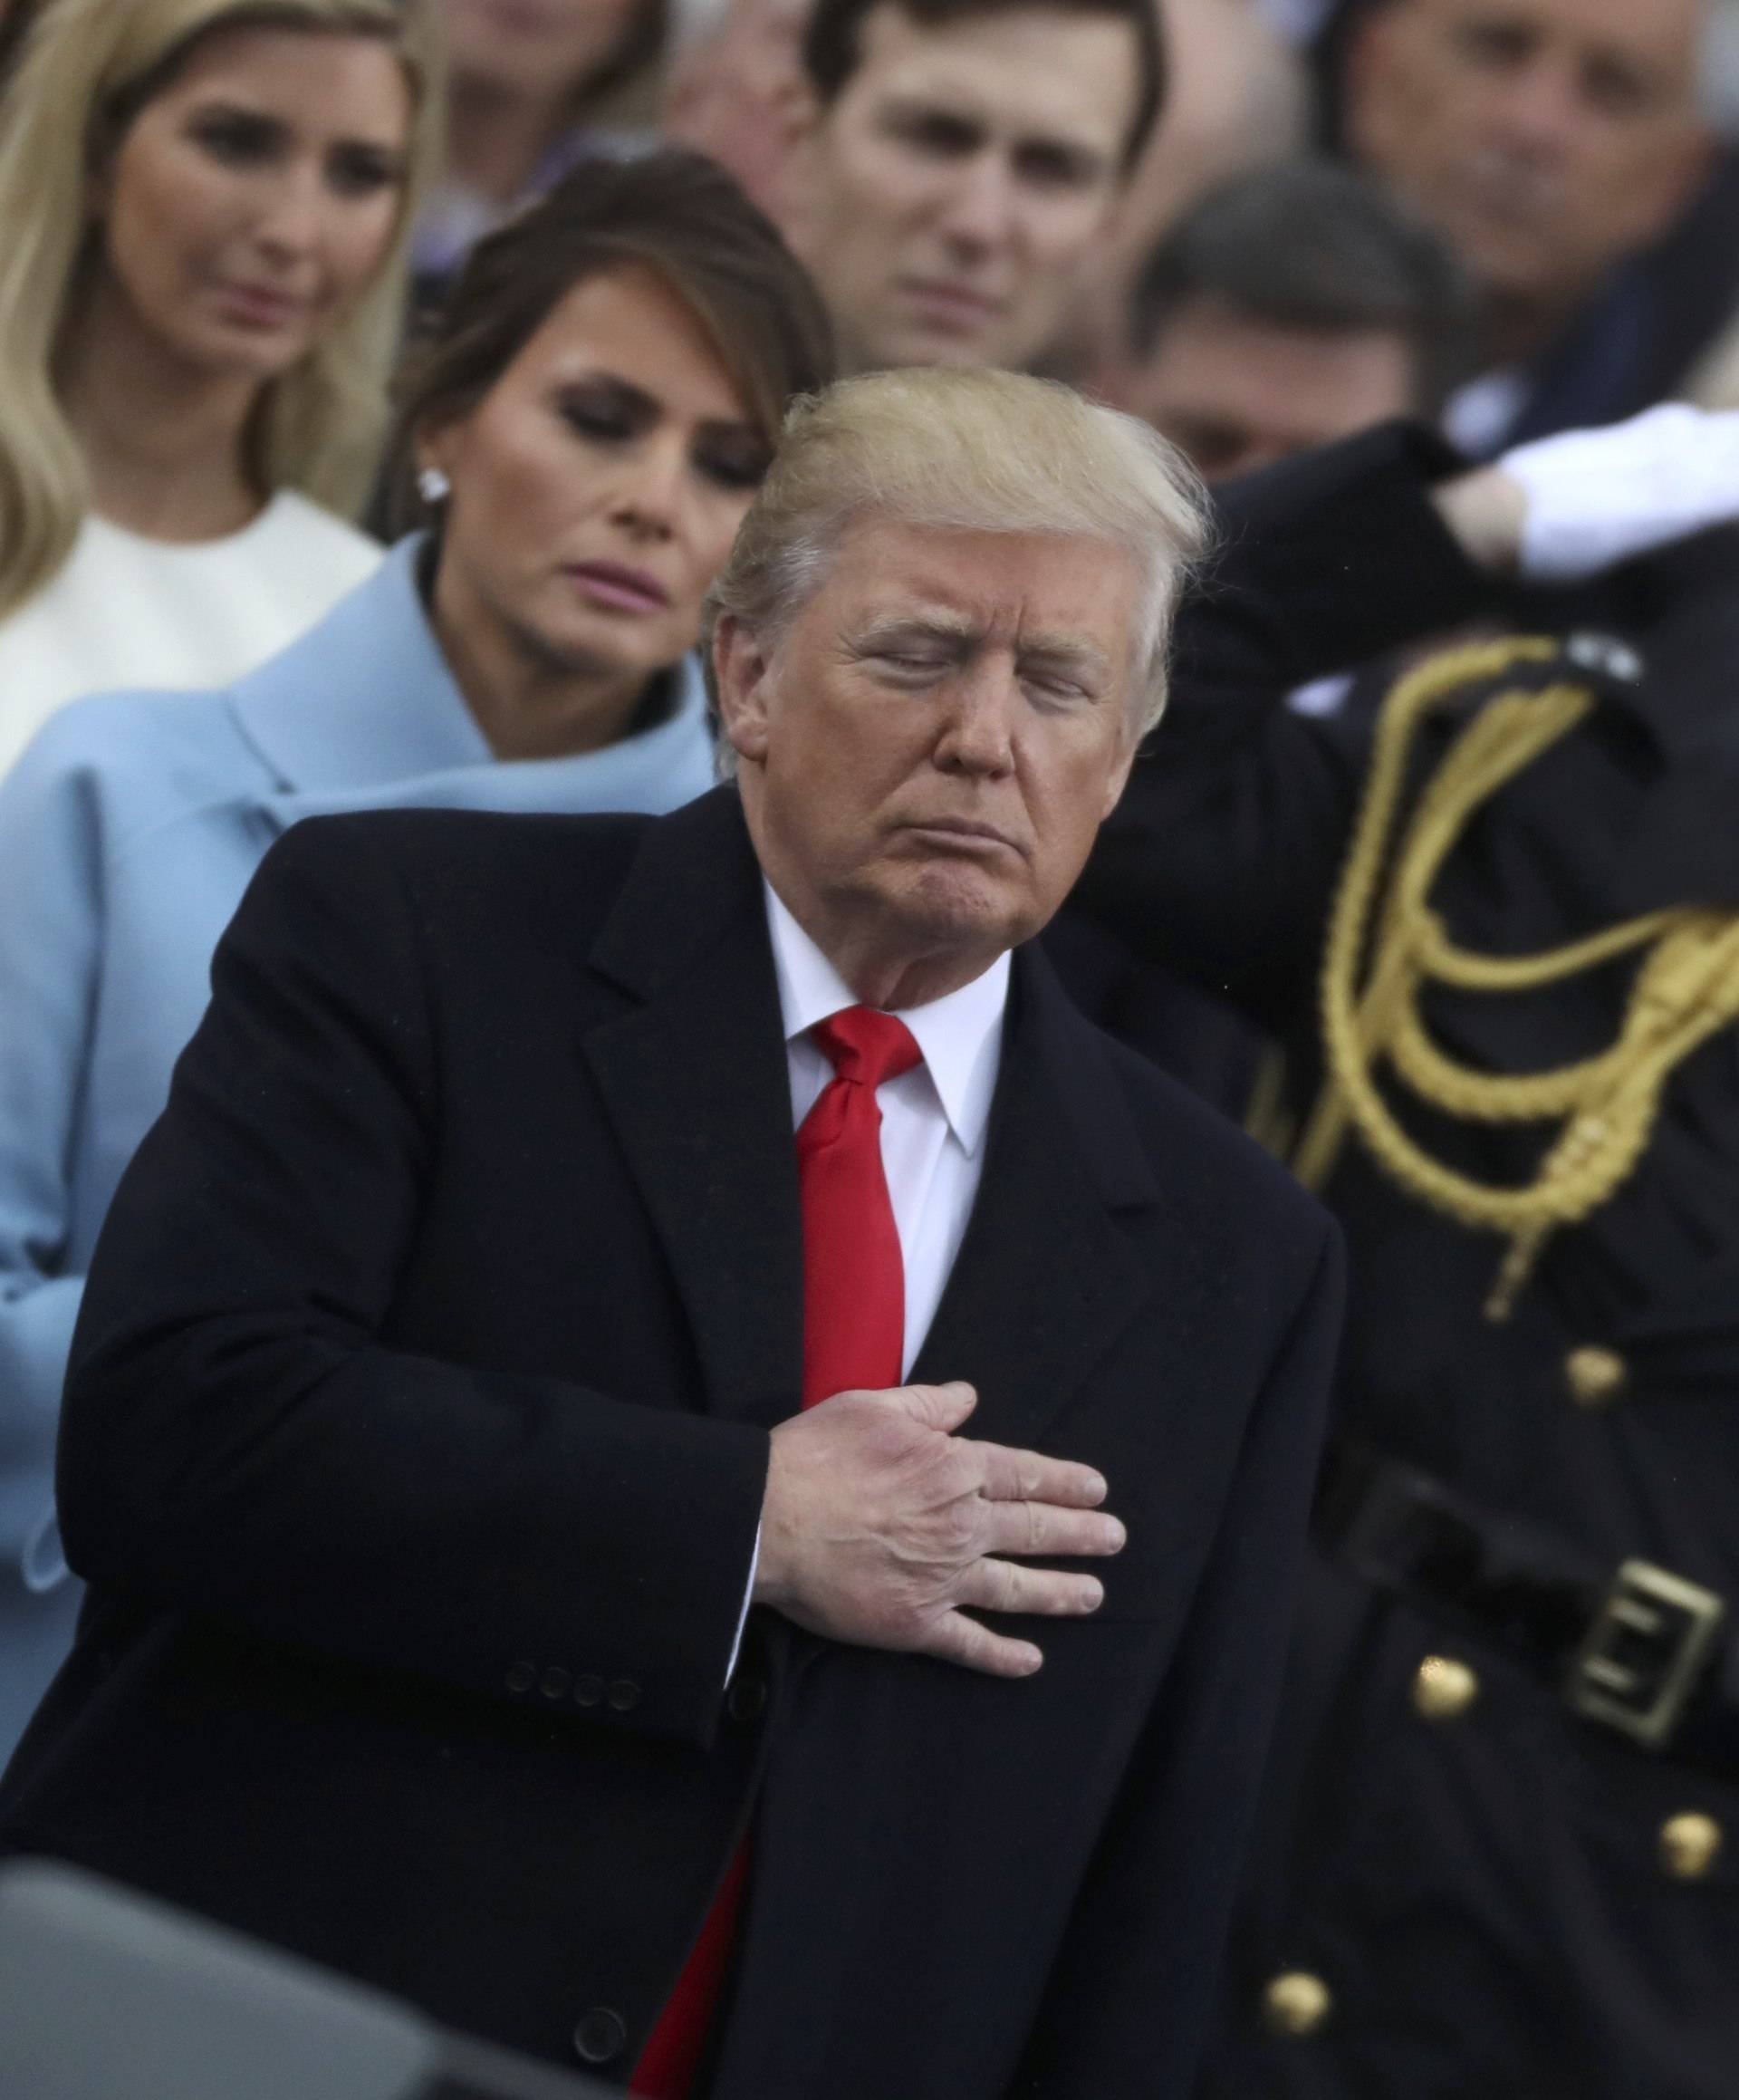 U.S. President Donald Trump and his wife Melania stand for the singing of the U.S. National Anthem during Donald Trump's inauguration ceremony at the U.S. Capitol in Washington